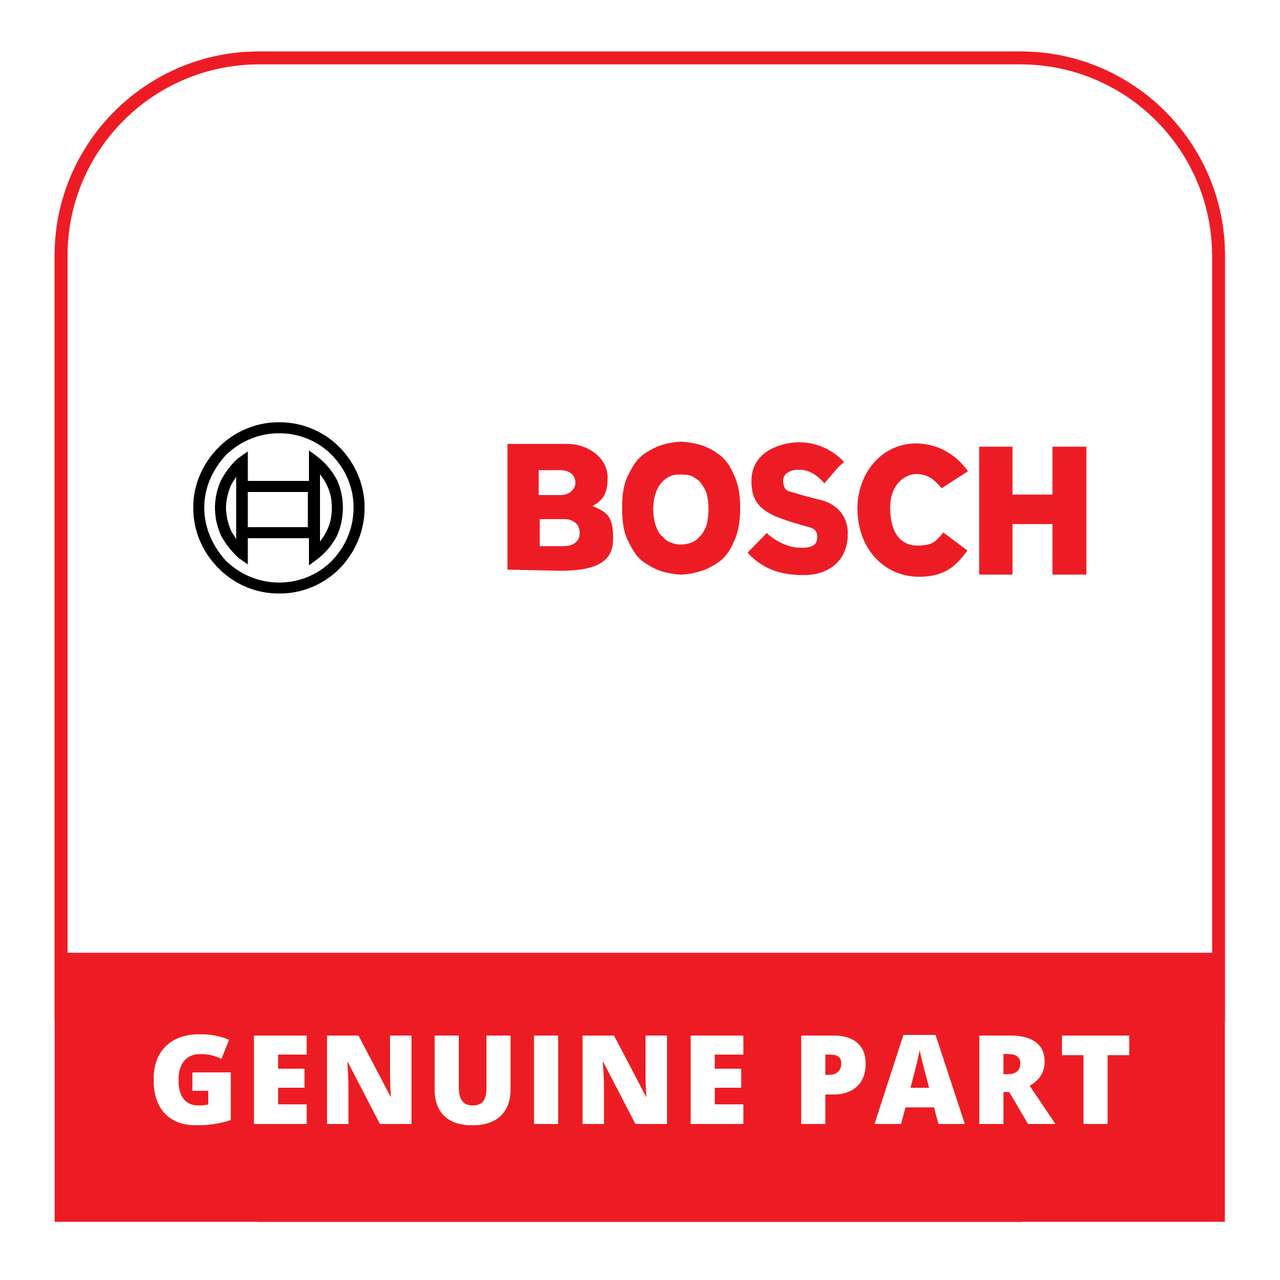 Bosch (Thermador) 10021181 - Pipe Connection Piece - Genuine Bosch (Thermador) Part